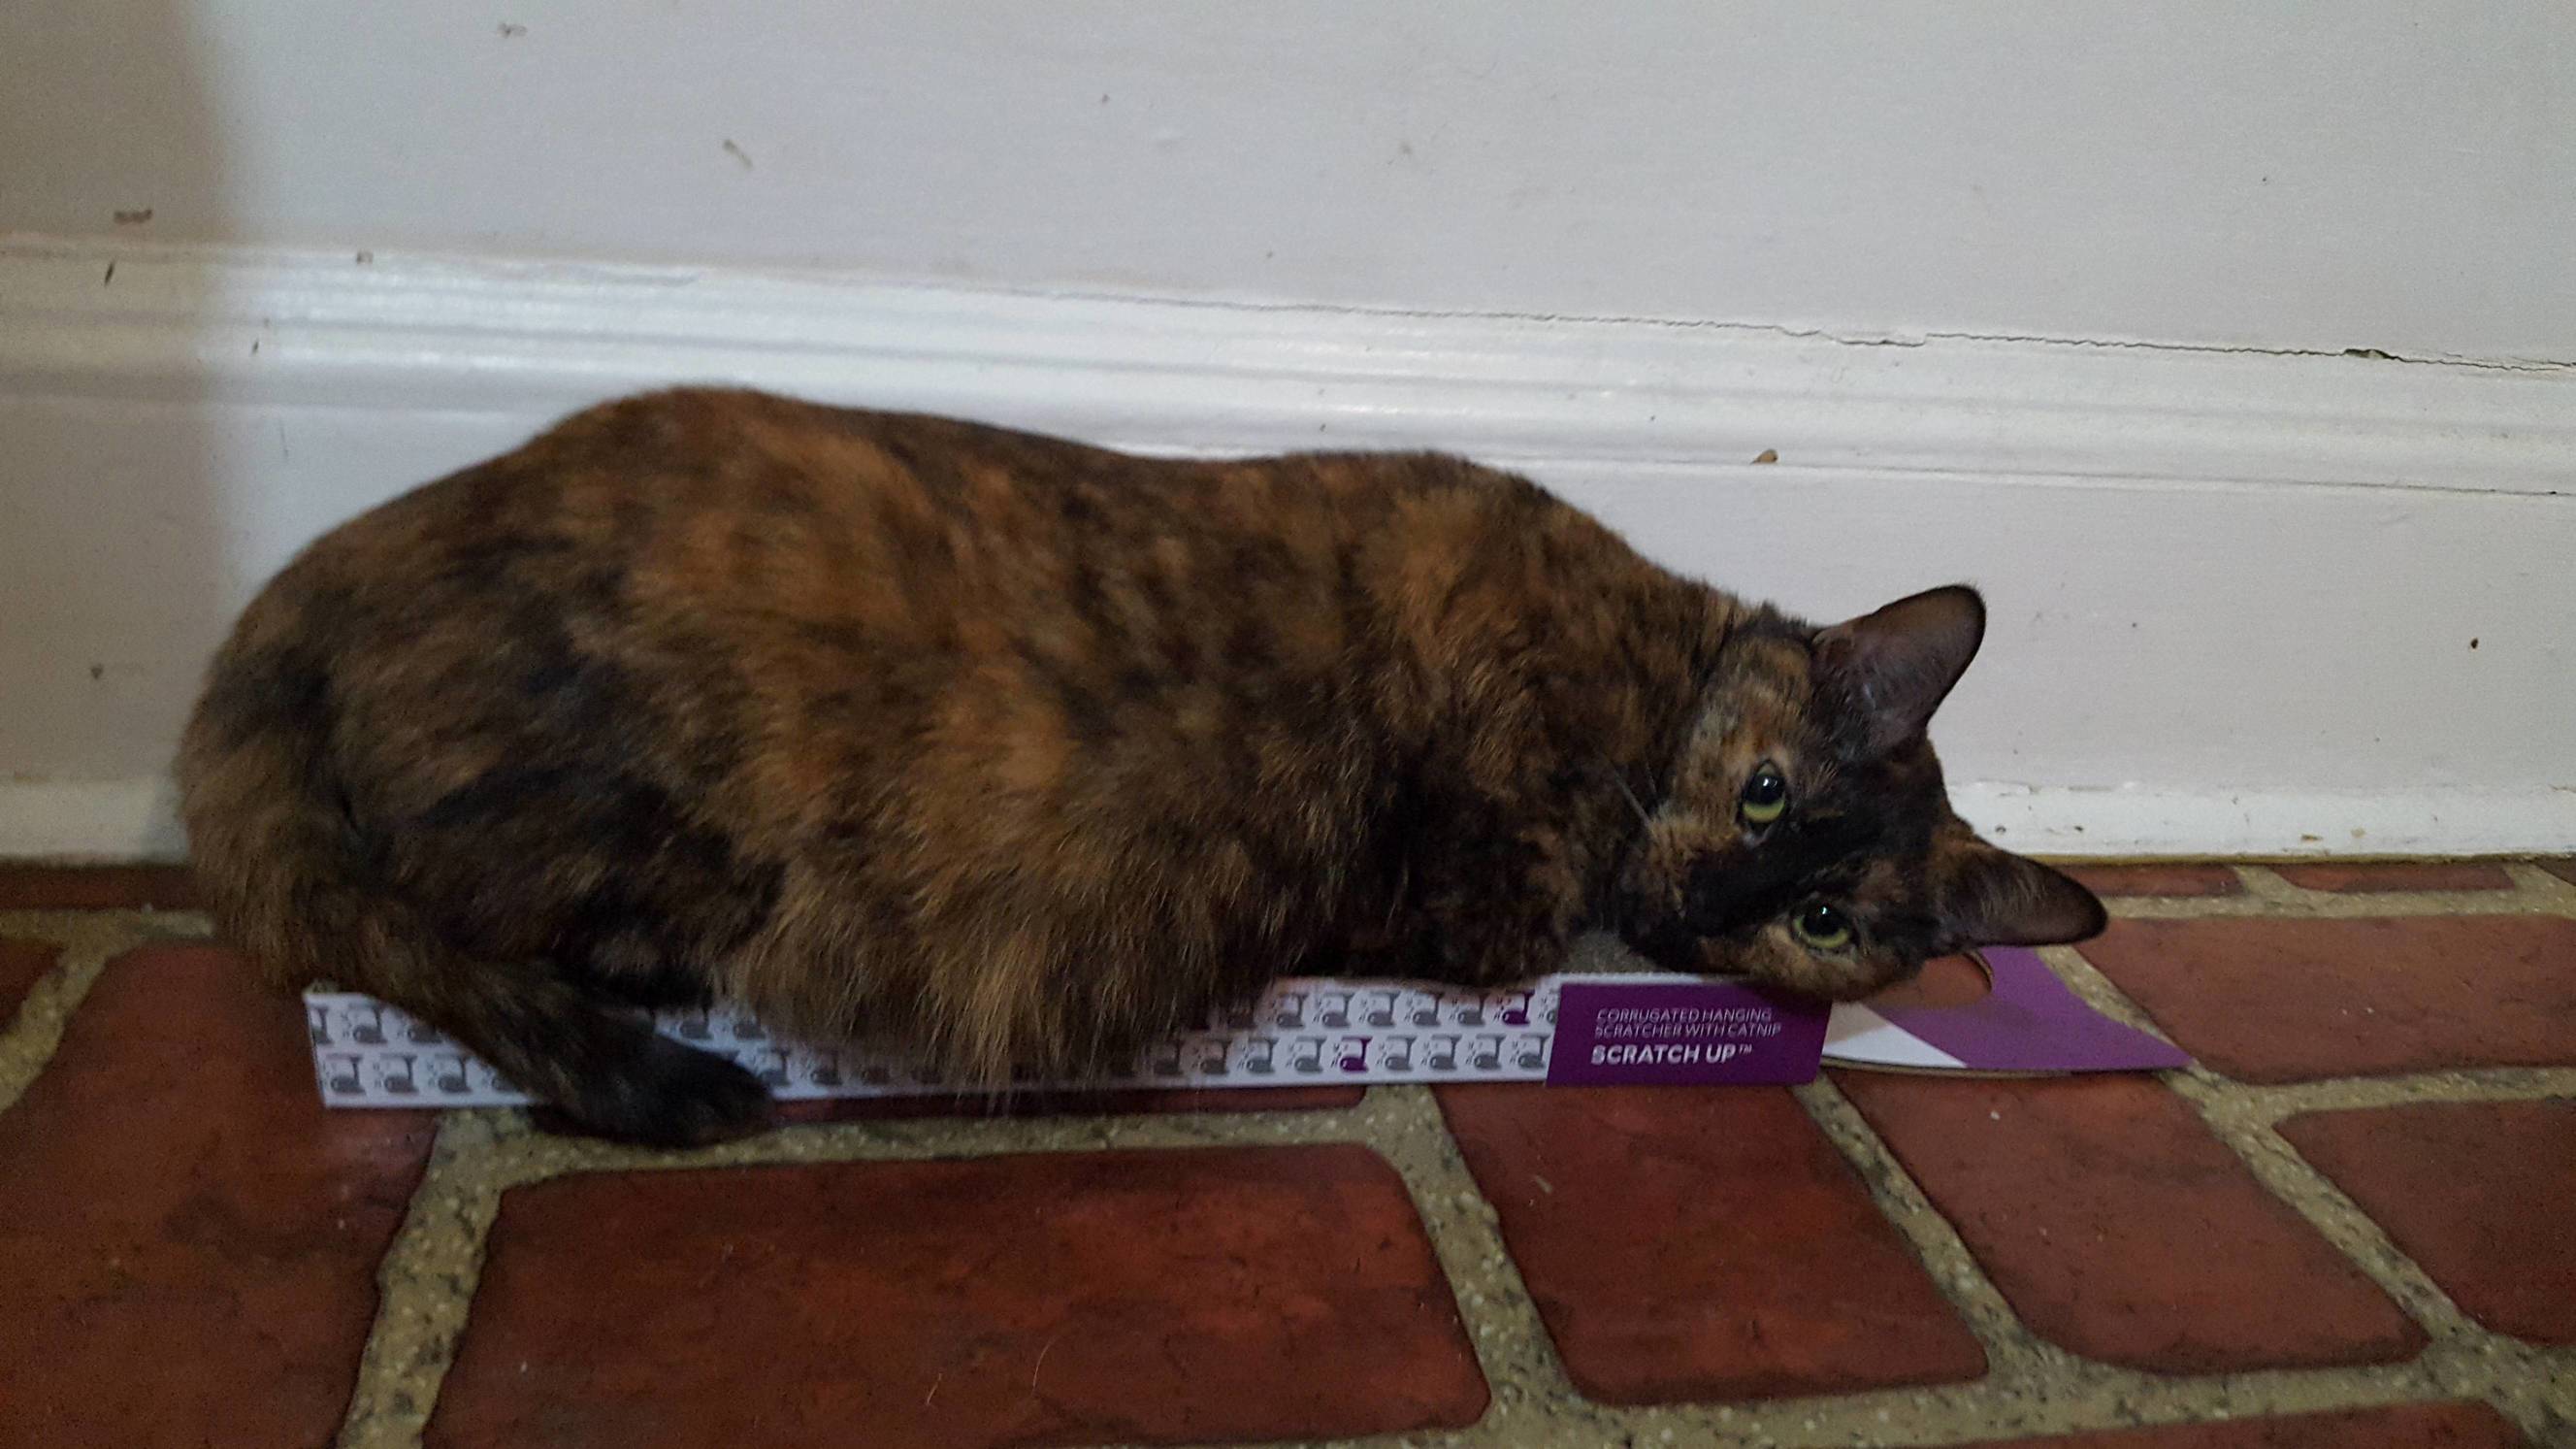 She uses her scratch pad as a bed